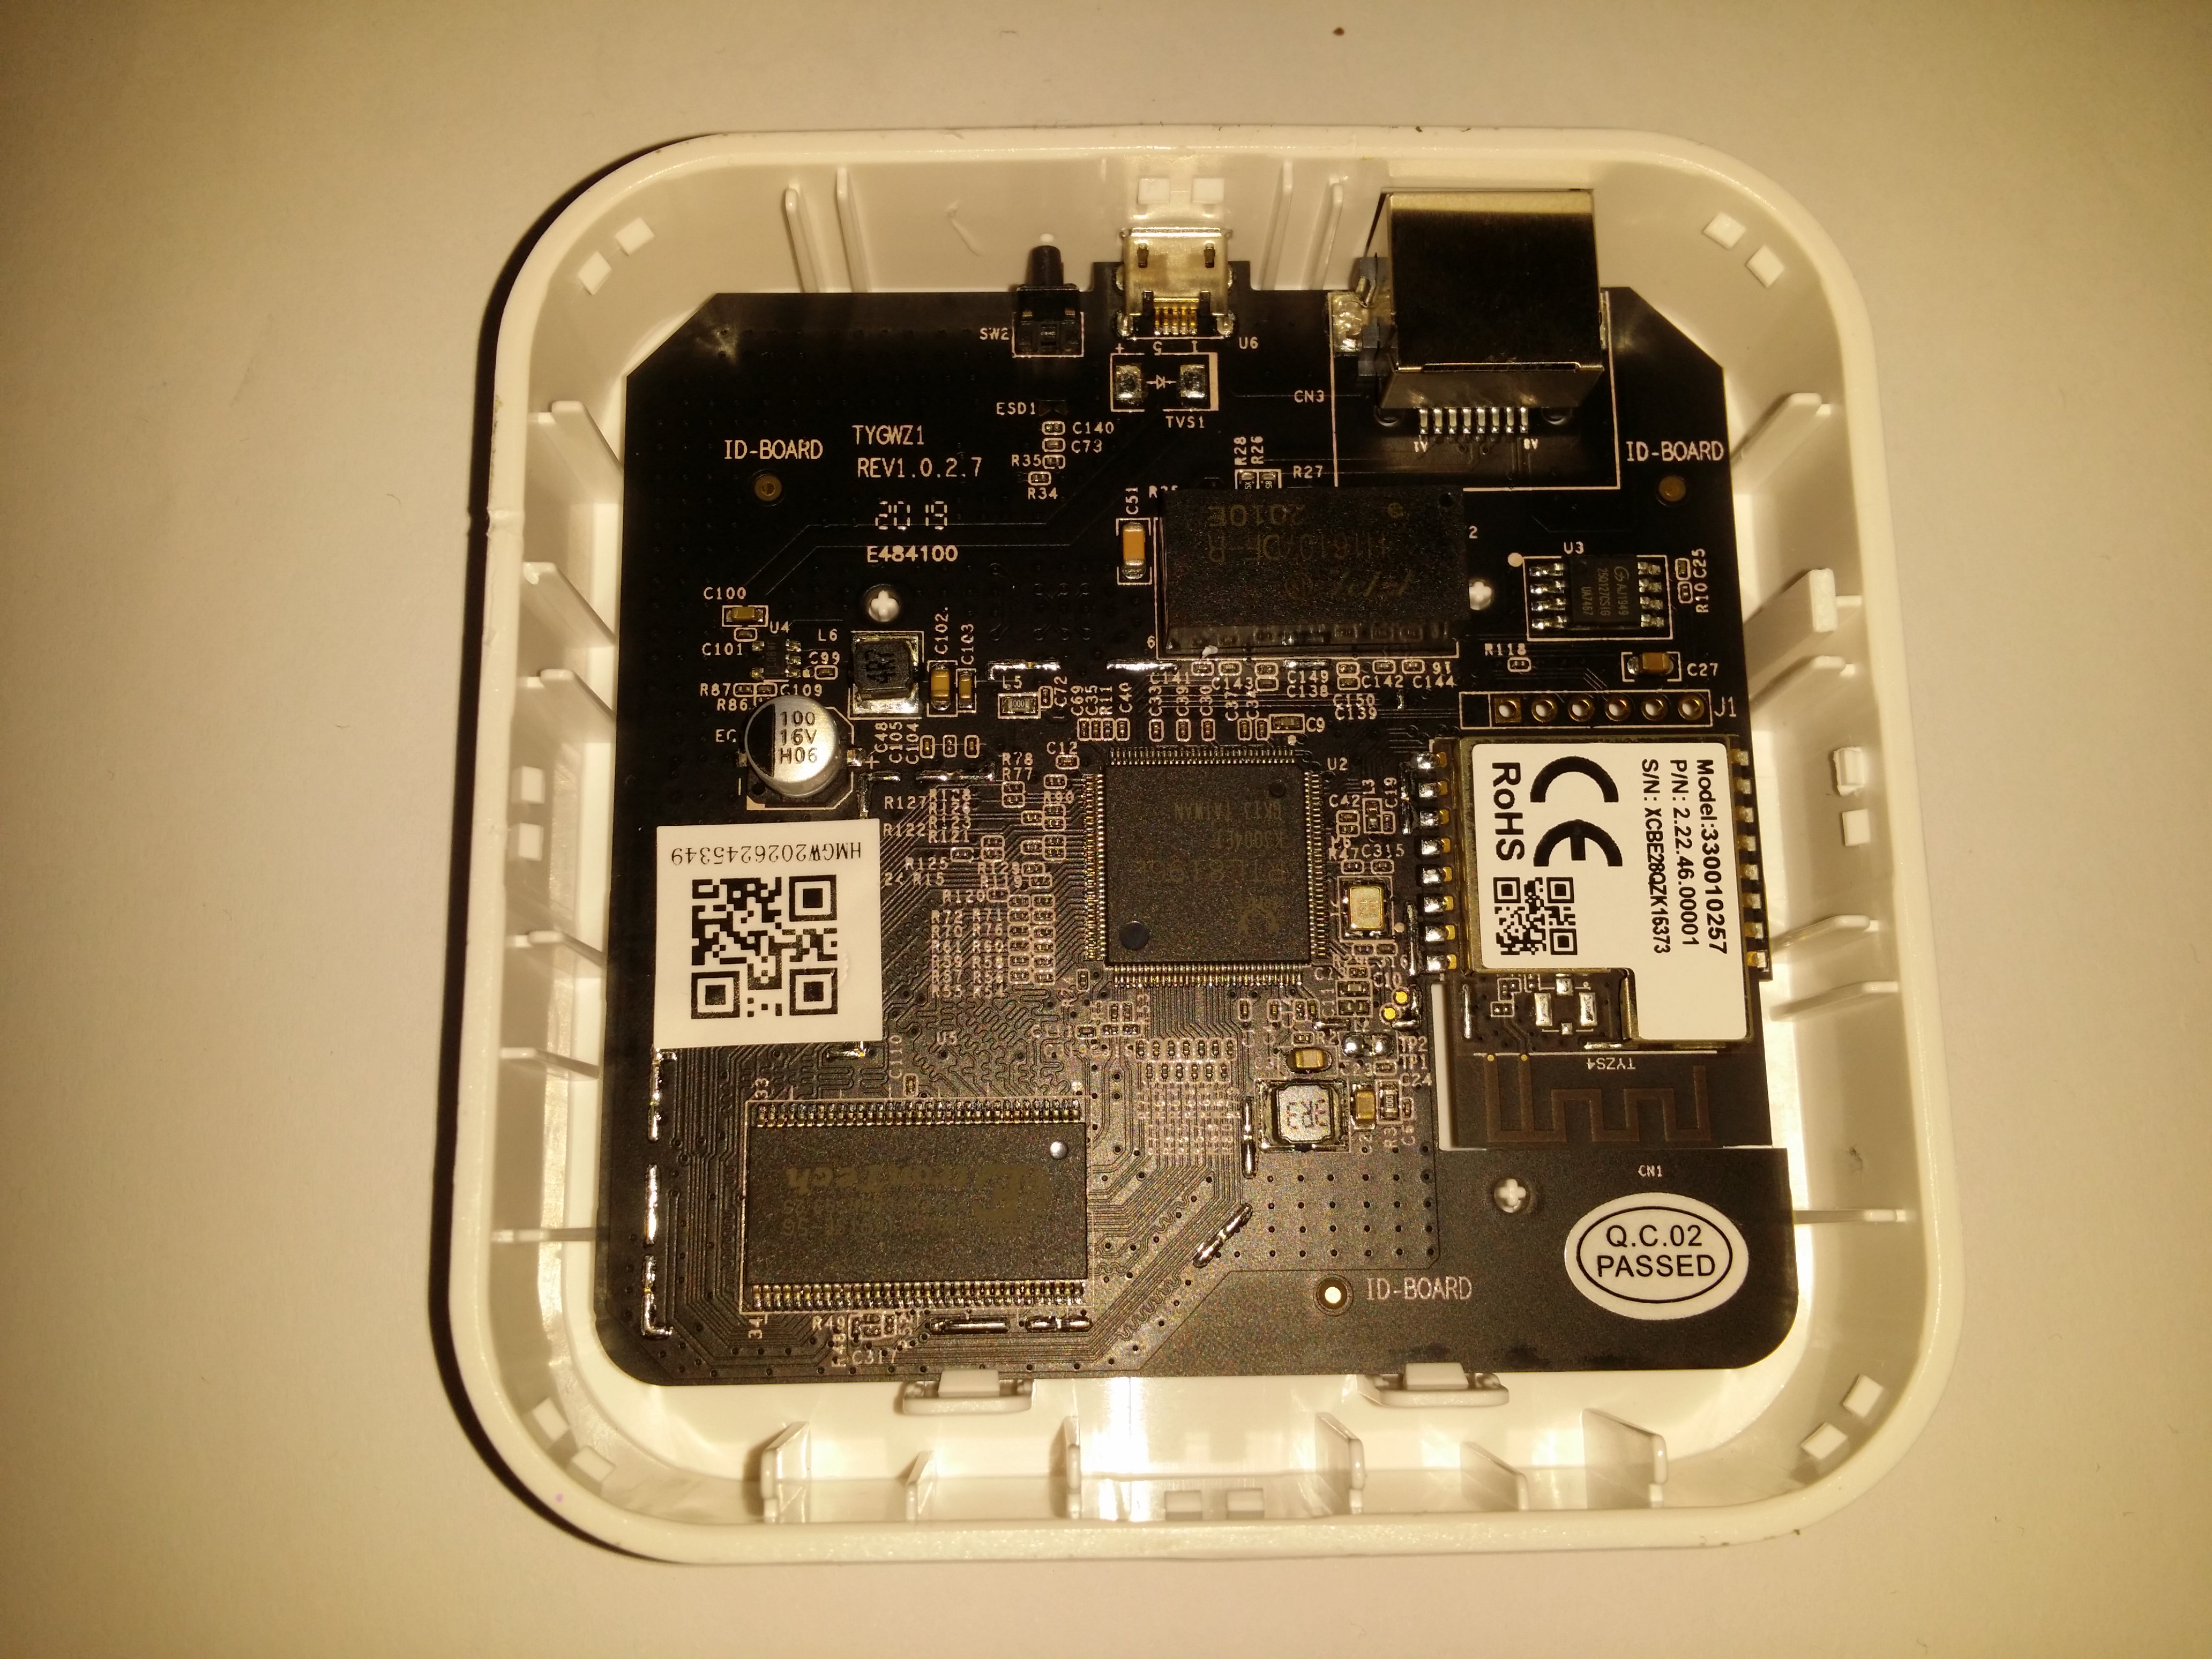 branded Open Source for Zigbee products users Lidl (Silvercrest Lux) and Livarno